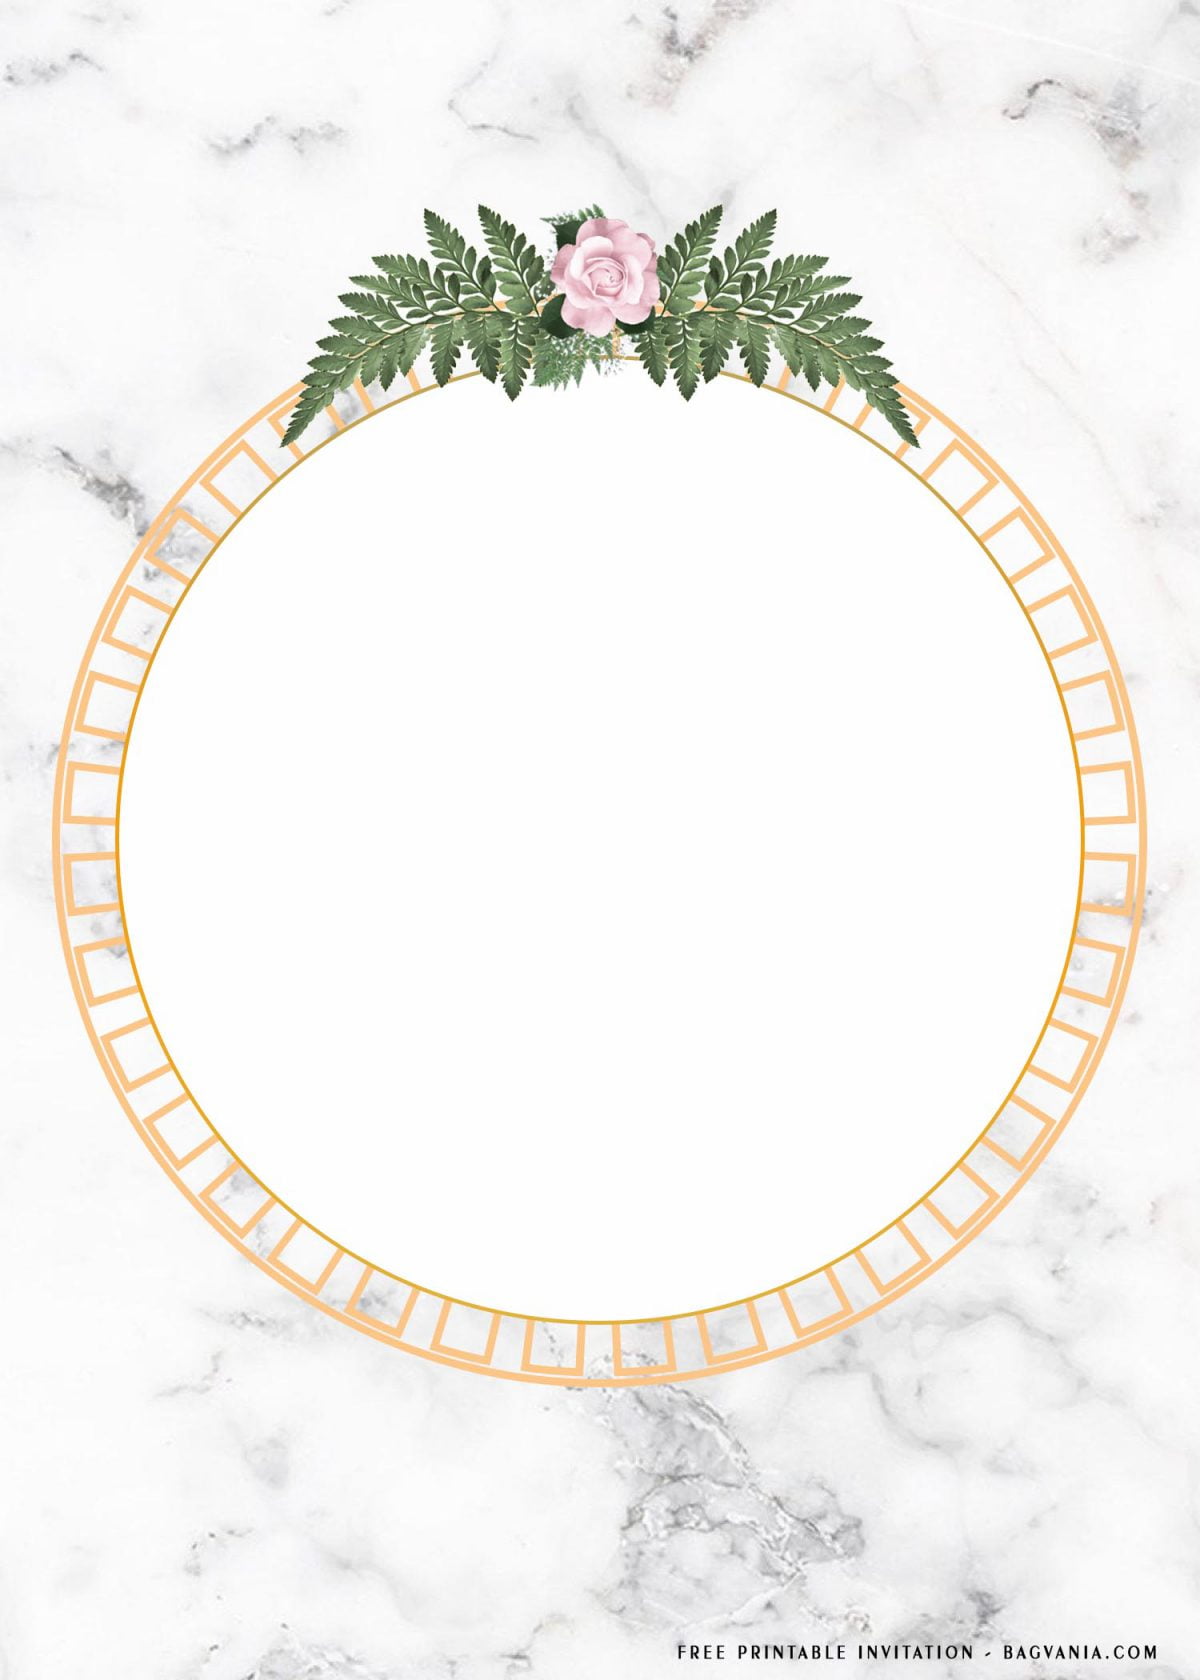 Free Printable Round Golden Frame Birthday Invitation Templates With Pink Roses